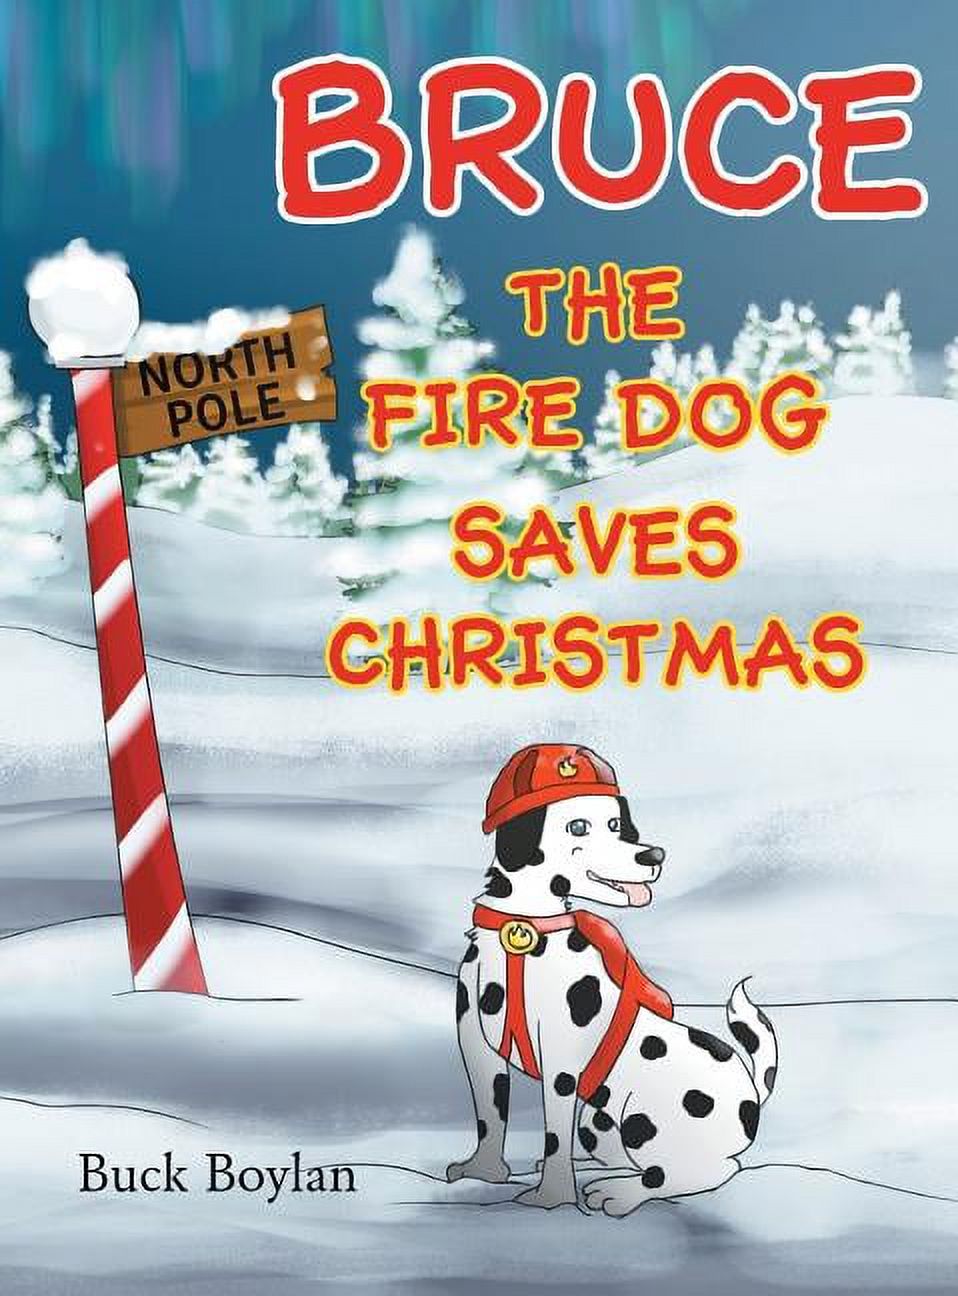 Bruce the Fire Dog Saves Christmas (Hardcover) - image 1 of 1